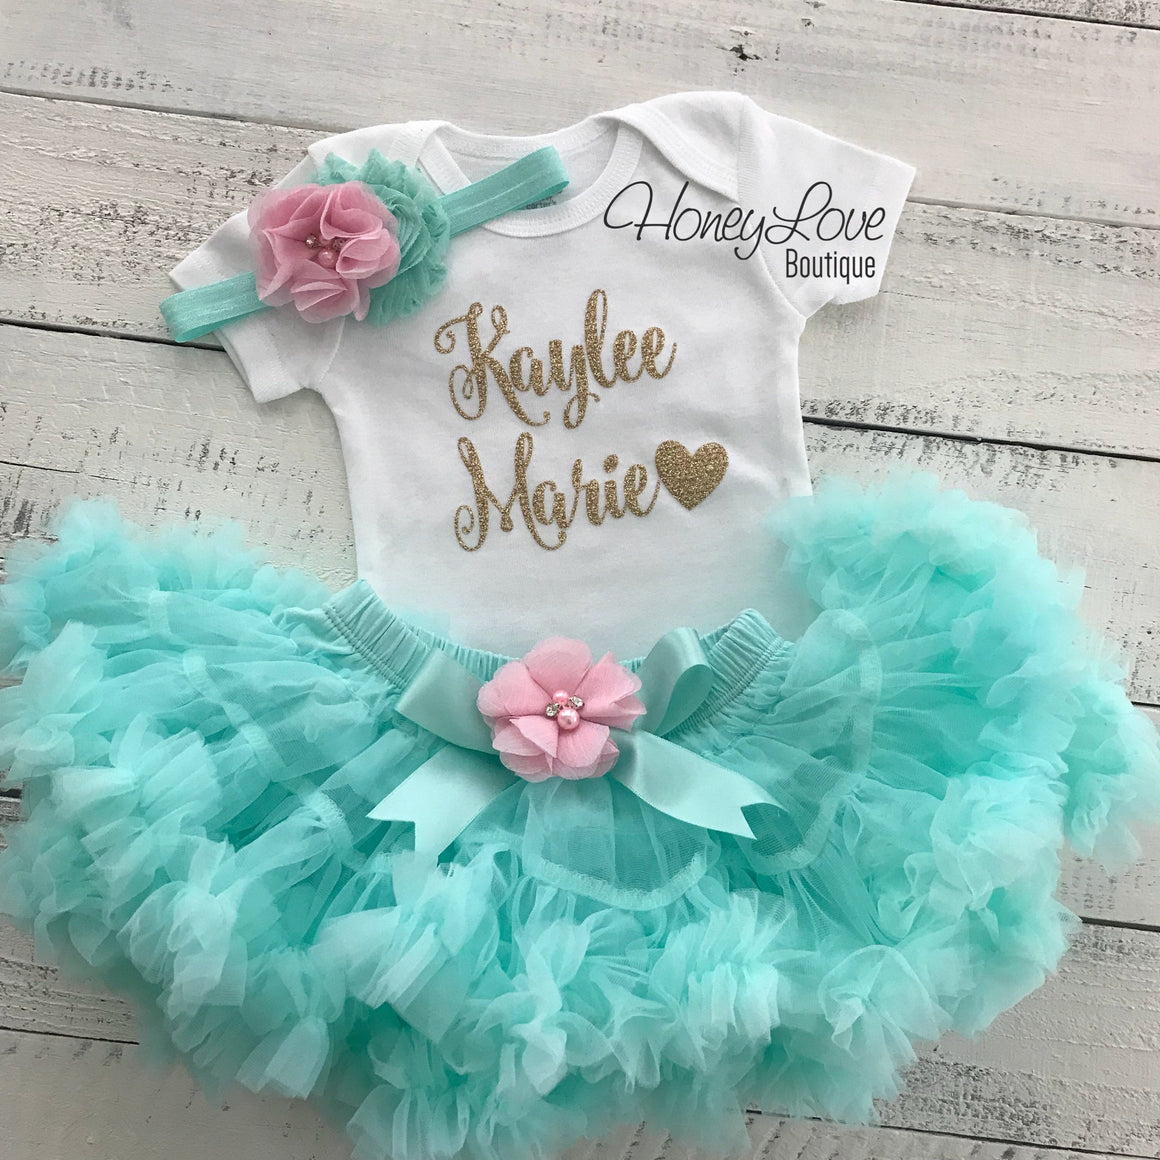 PERSONALIZED Name Outfit - Mint/Aqua and Gold Glitter - Light Pink flower embellished pettiskirt - HoneyLoveBoutique